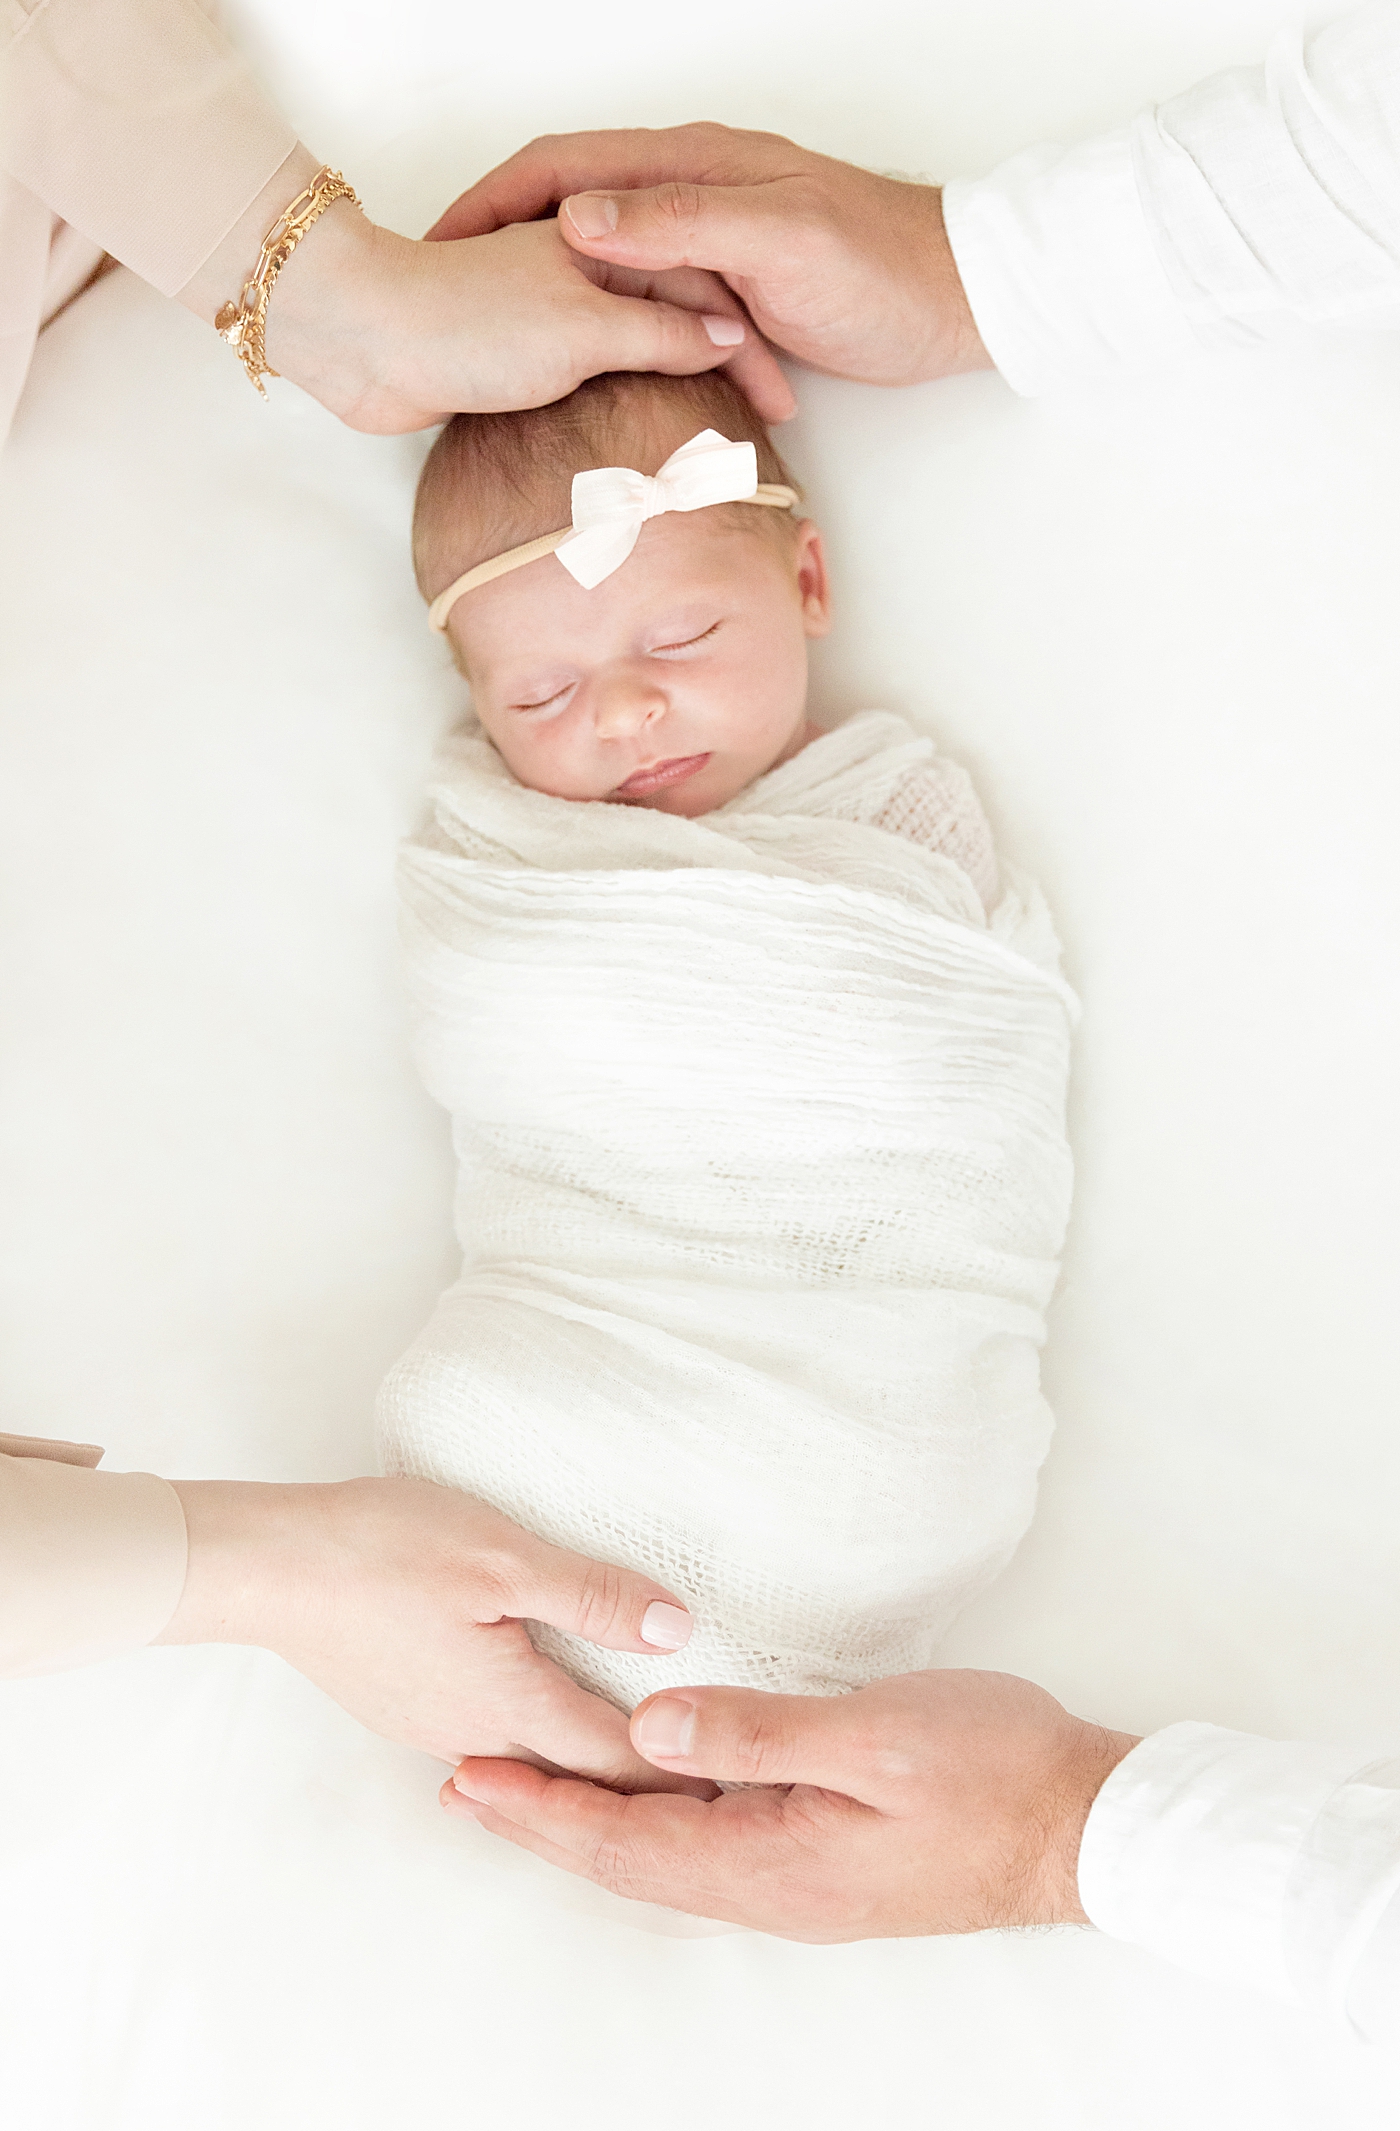 | Image by Mooresville Newborn Photographer Chrissy Winchester